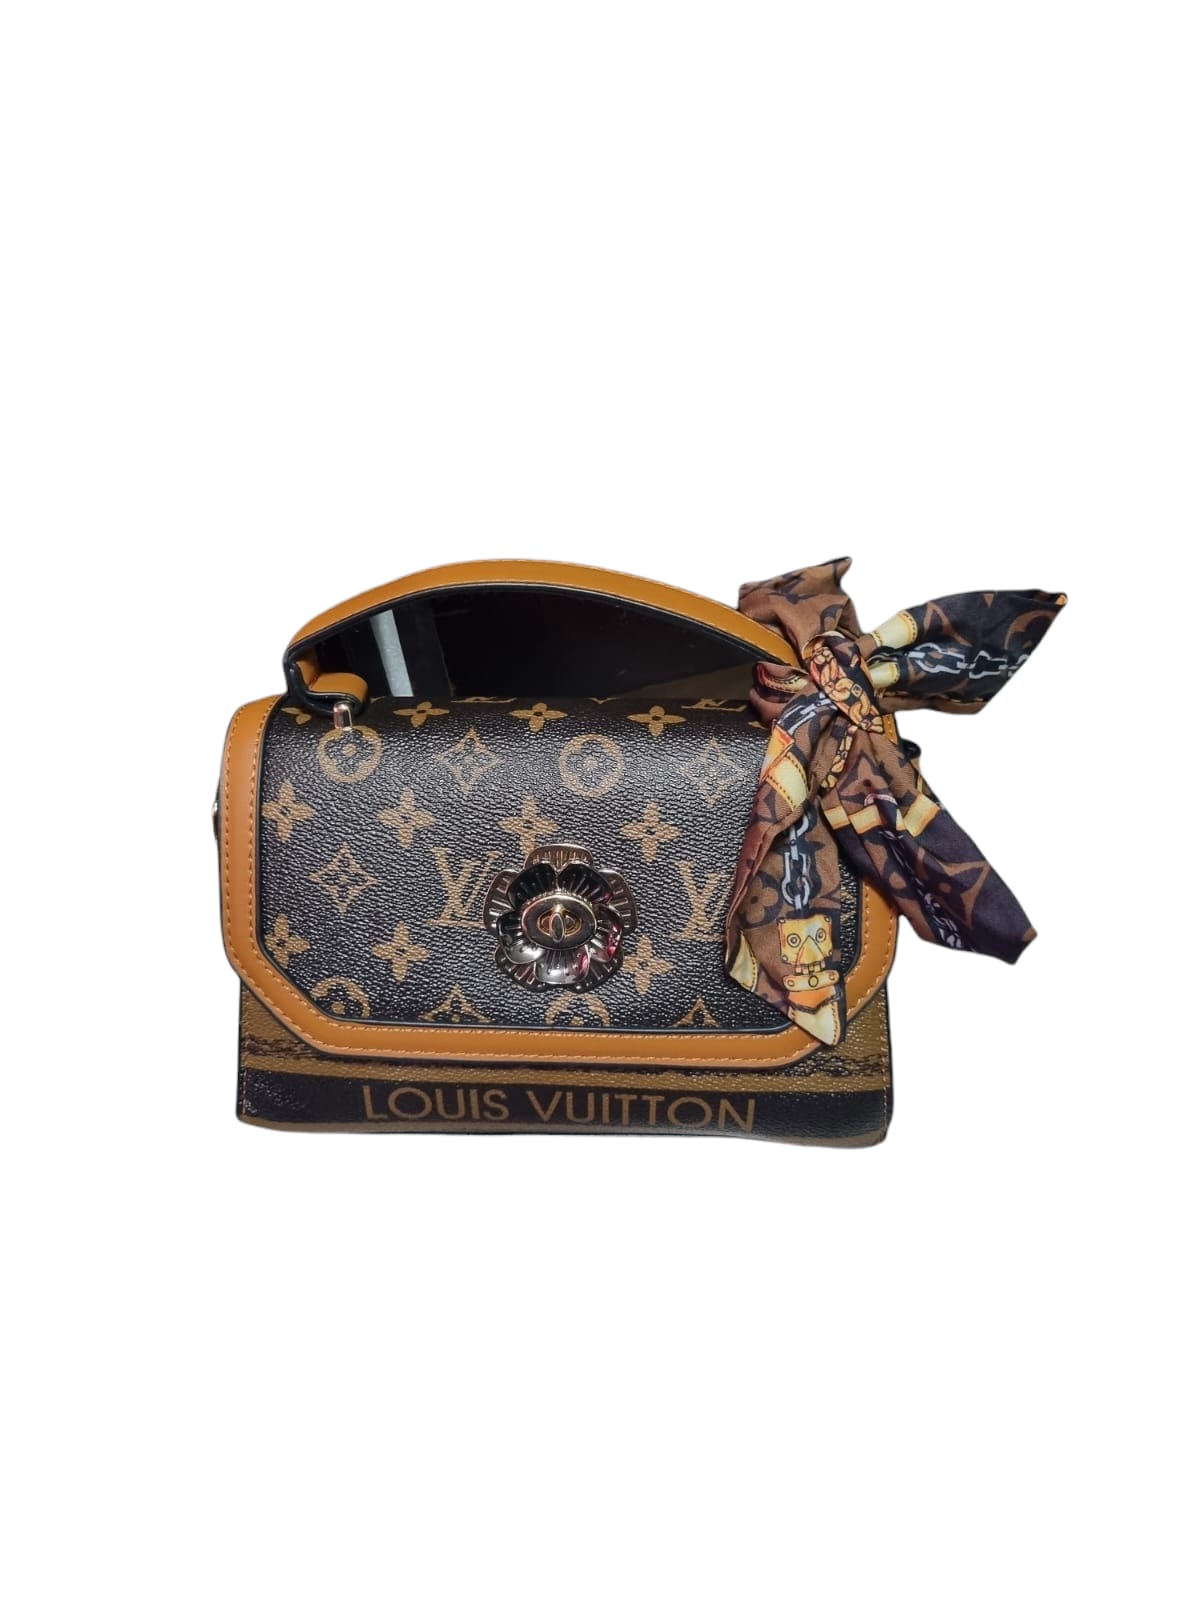 LV Bag - With Scarf Brown or White - Fragrance Deliver SA